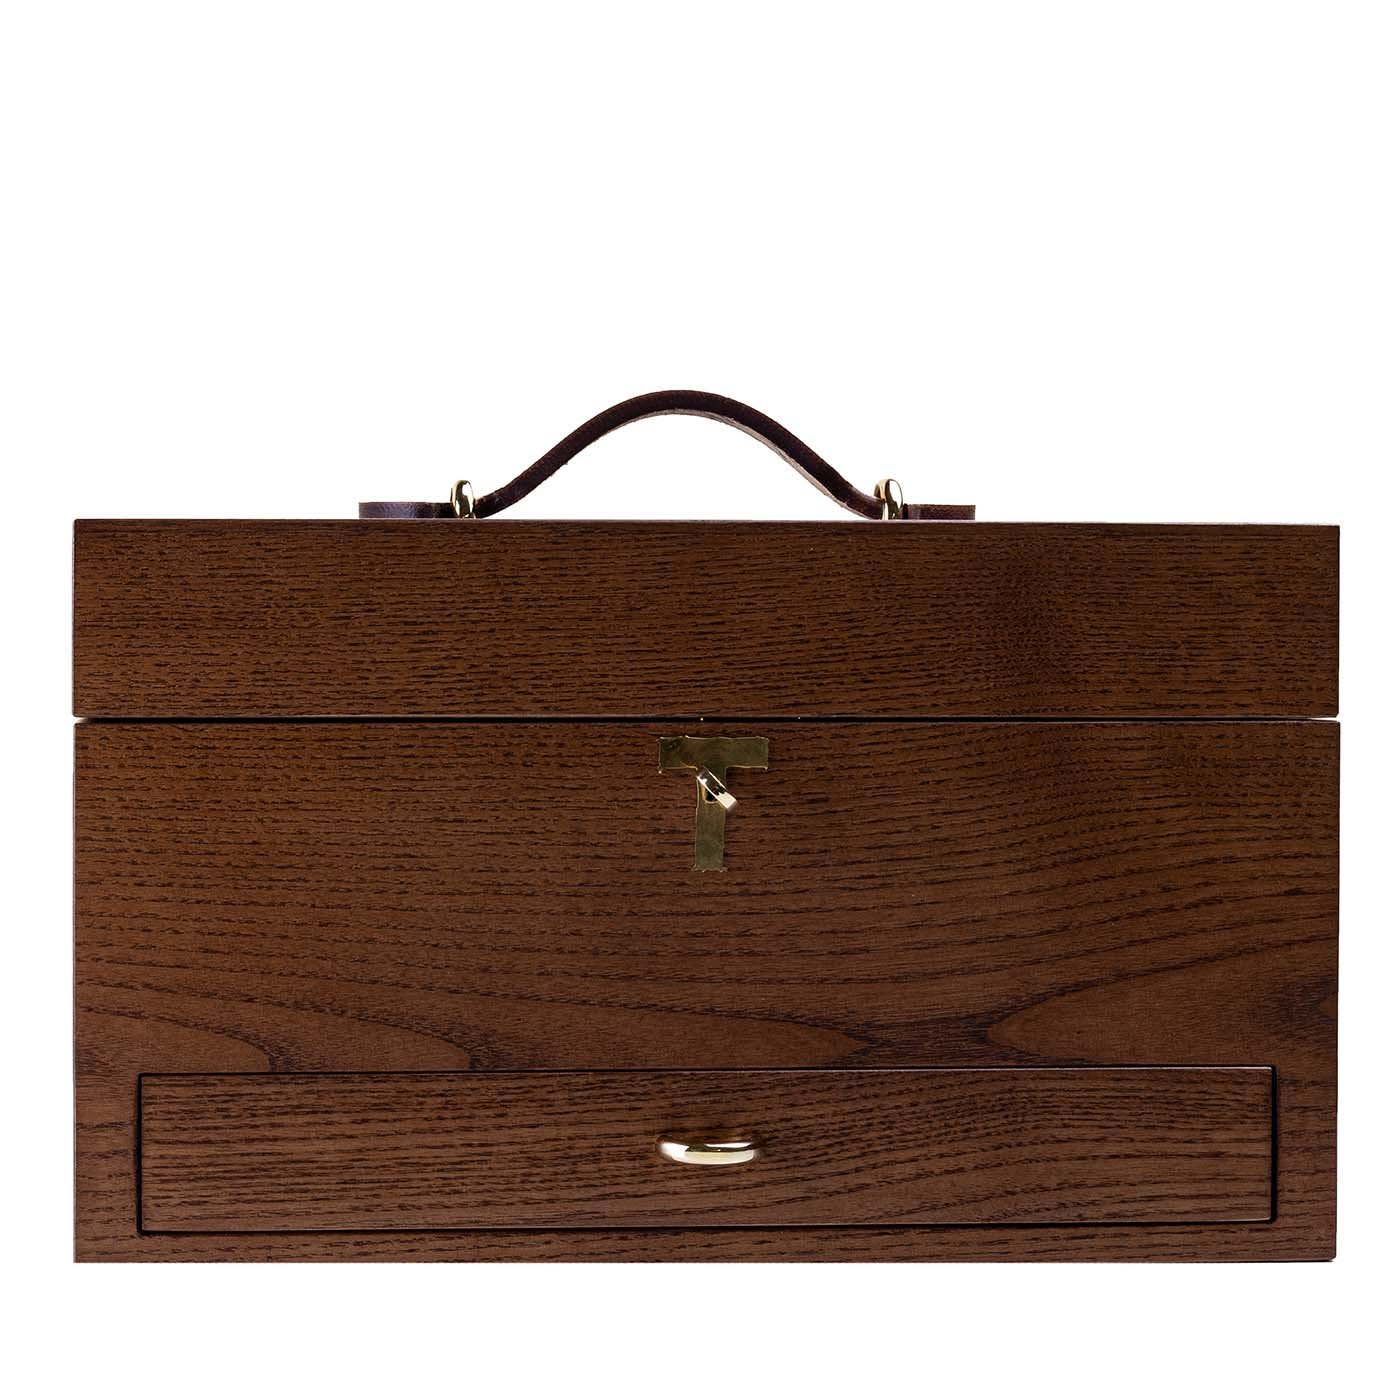 Ash wood box of shoe accessories - T model with key - Turms